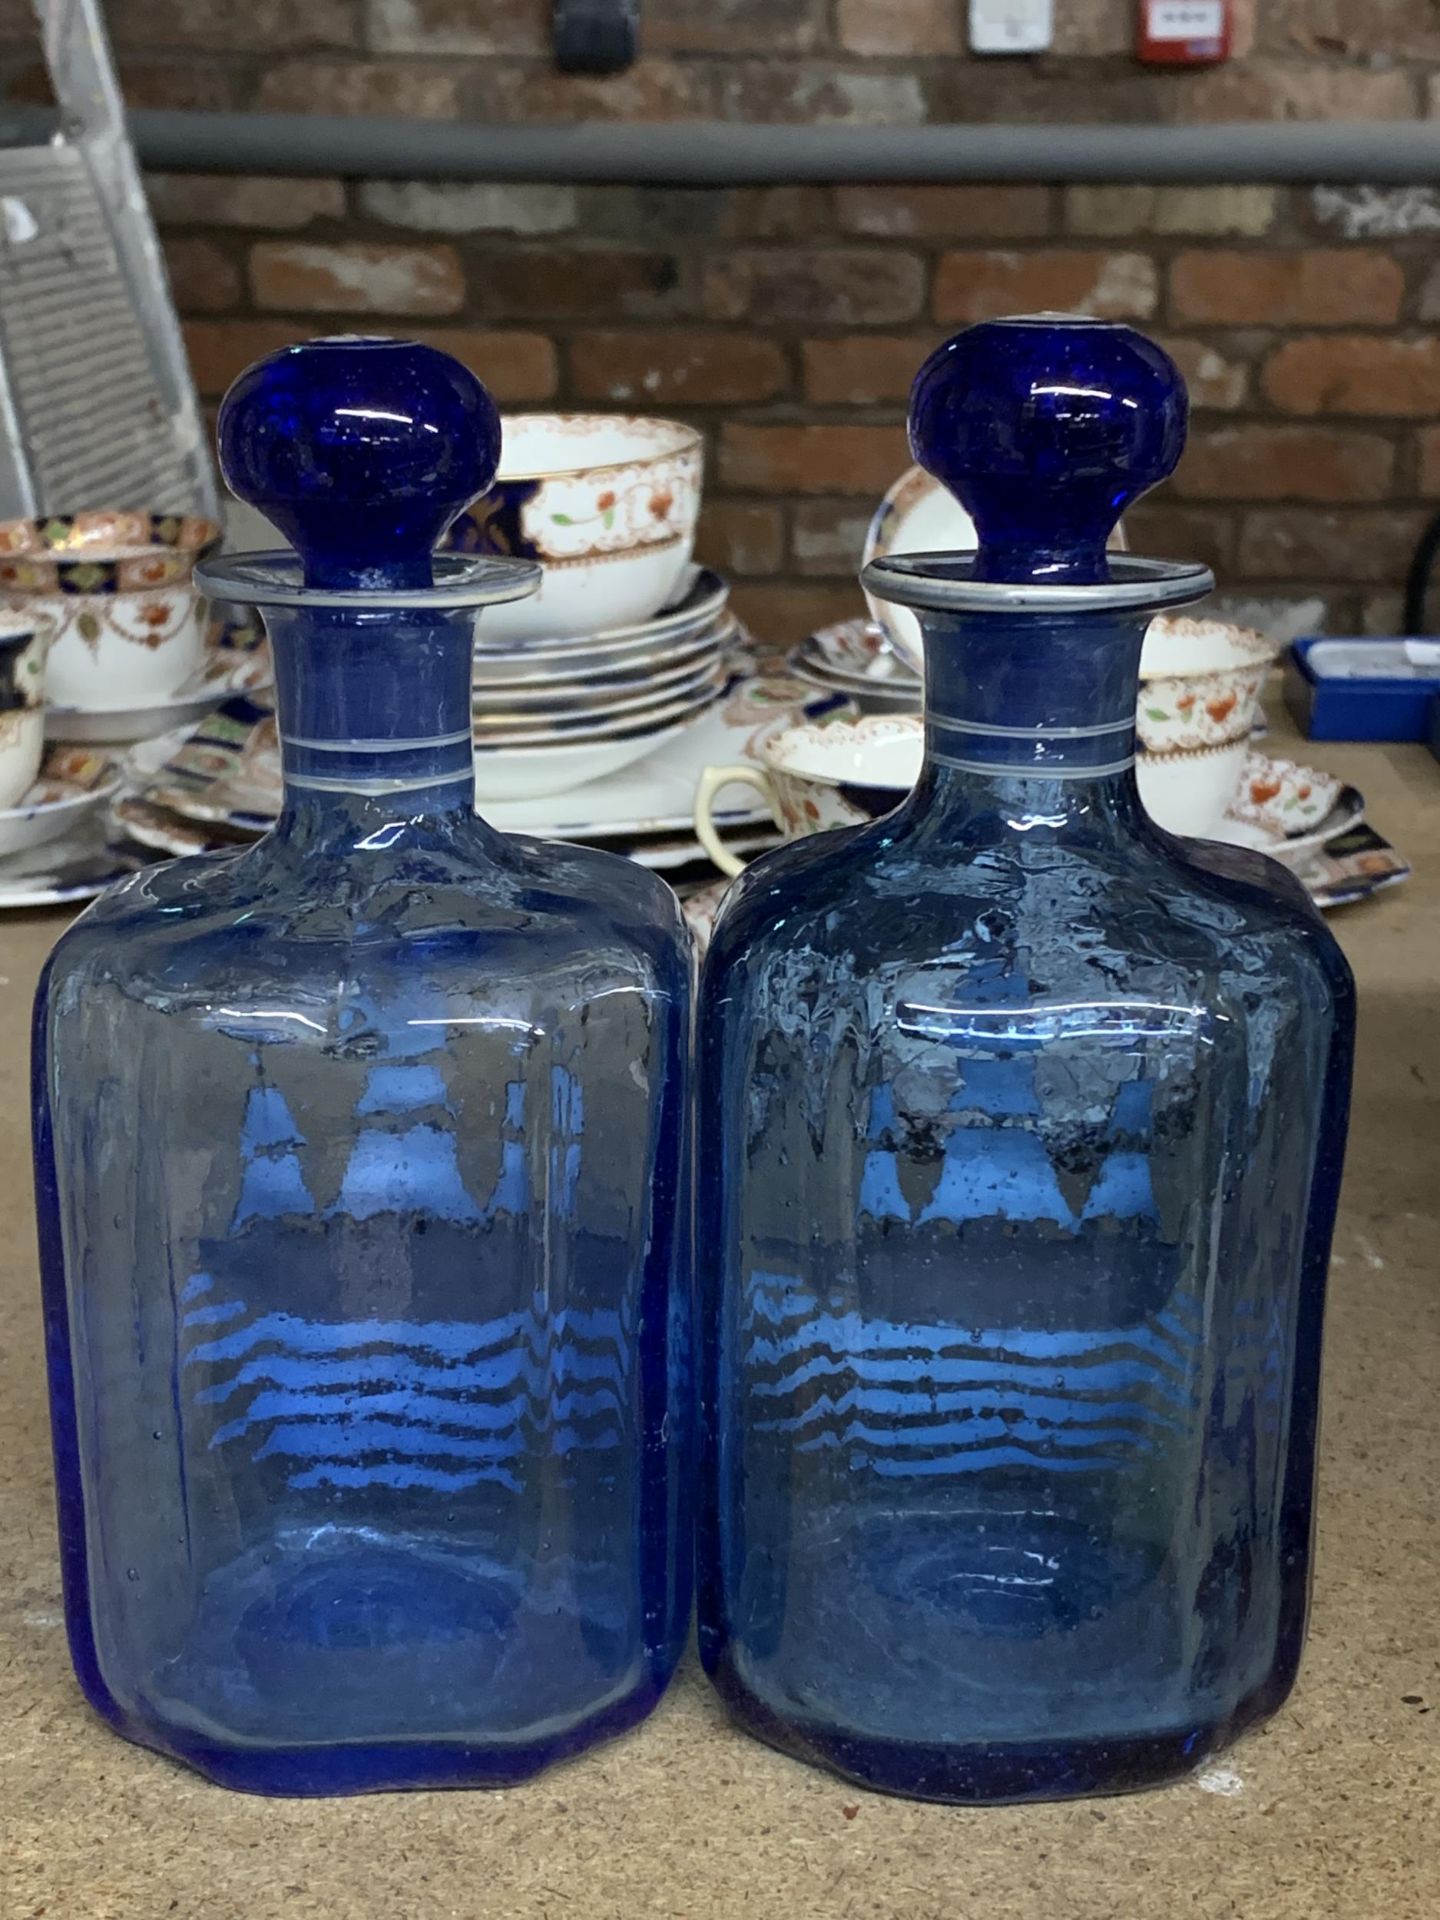 A PAIR OF VINTAGE BLUE GLASS BOTTLES WITH PAINTED SHIPS DESIGN - Image 3 of 3